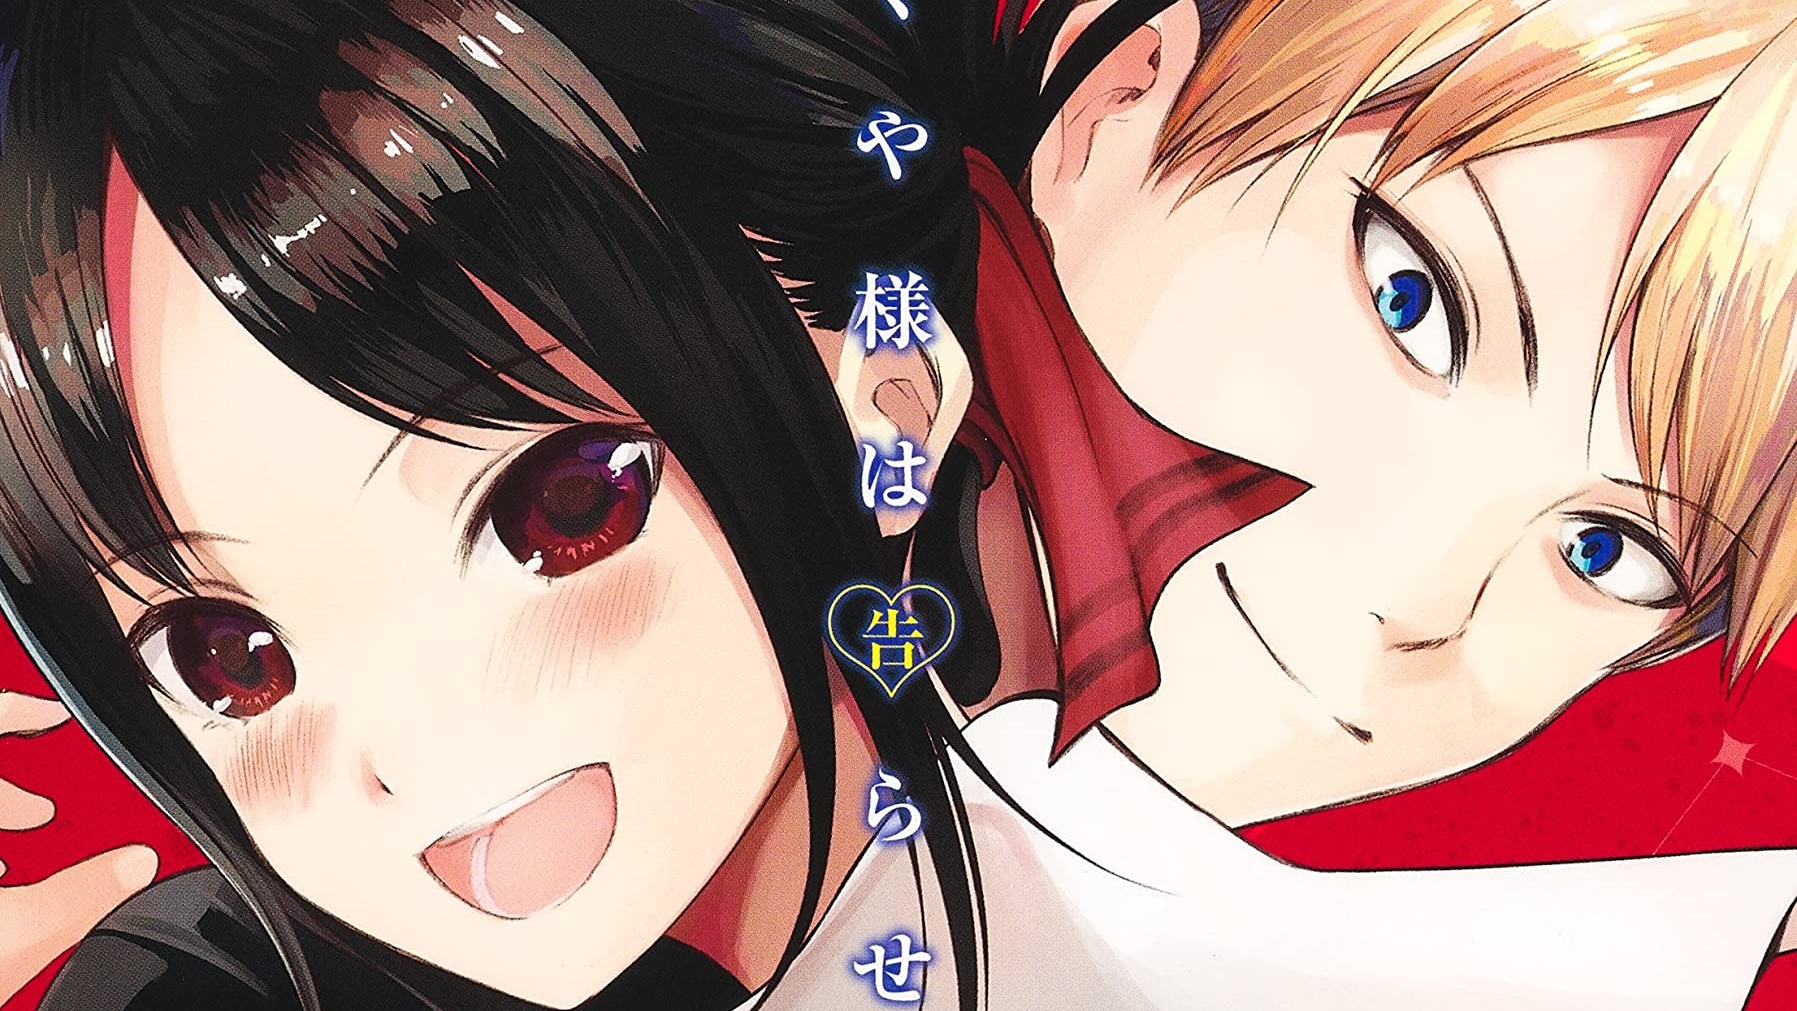 Kaguya-sama: Love Is War Manga Set to End in 14 Chapters With a Total of 28  Volumes